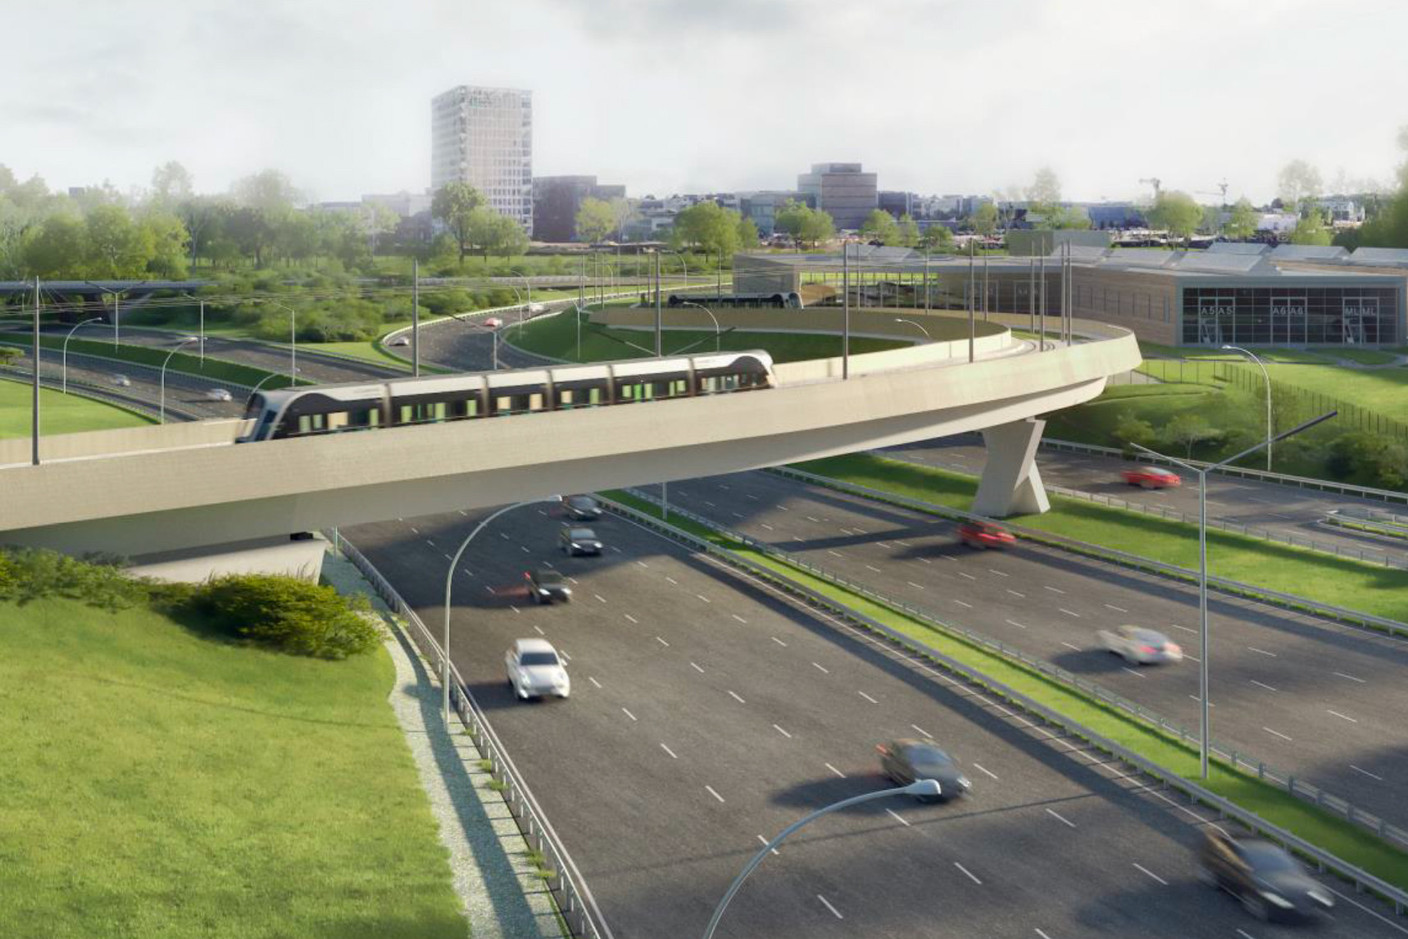 The tram will be able to travel on the bridge at up to 70 km/h (Photo: Luxtram)